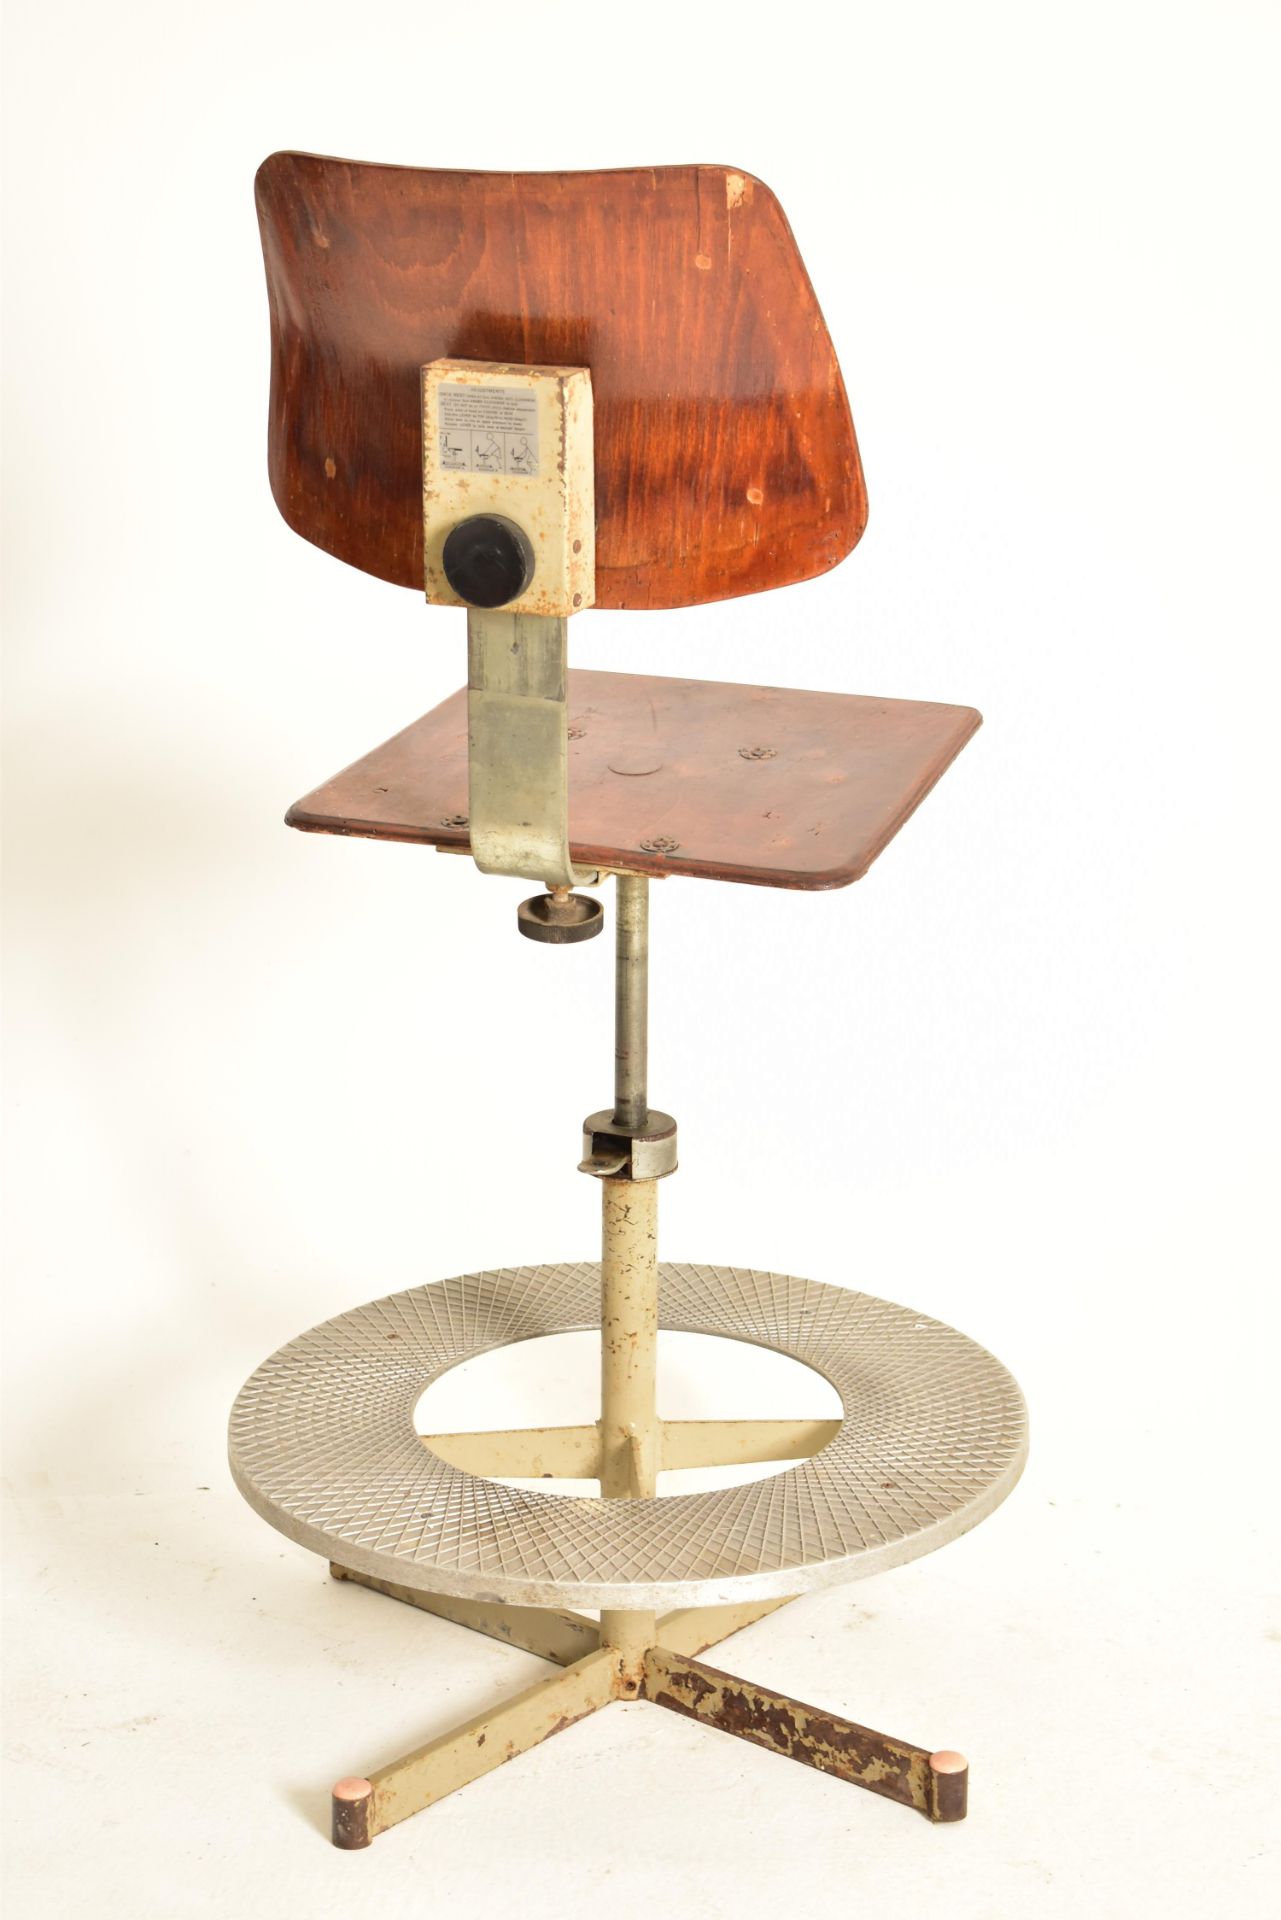 MID CENTURY CIRCA 1940S METAL & WOODEN MACHINIST CHAIR - Image 6 of 6